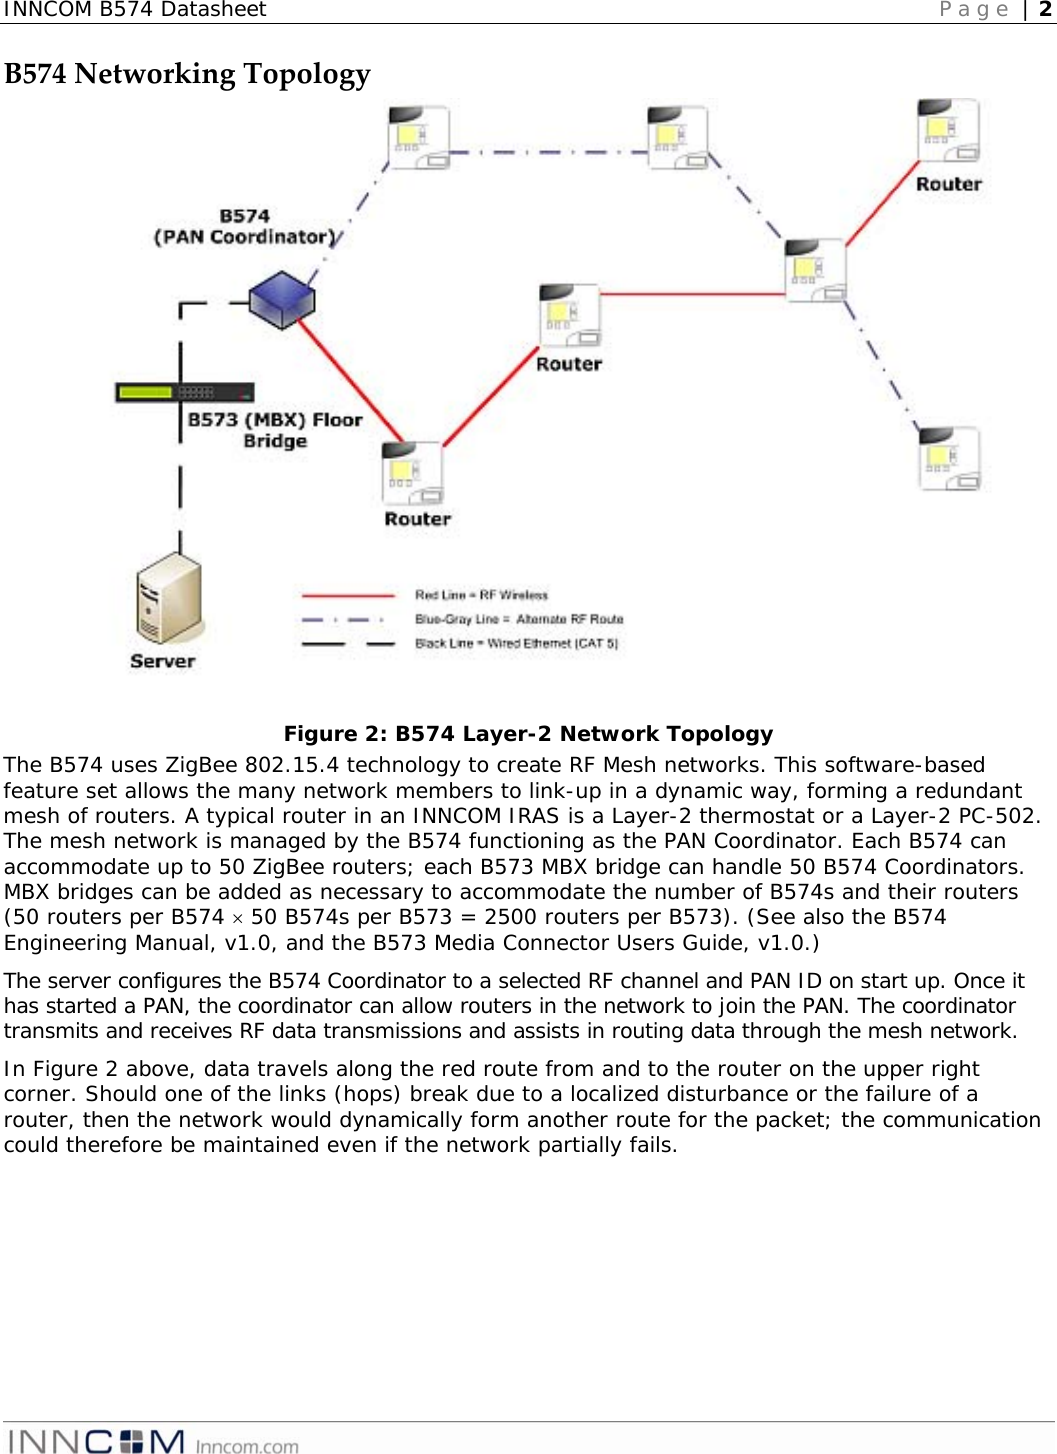 INNCOM B574 Datasheet   Page | 2   B574NetworkingTopologyFigure 2: B574 Layer-2 Network Topology The B574 uses ZigBee 802.15.4 technology to create RF Mesh networks. This software-based feature set allows the many network members to link-up in a dynamic way, forming a redundant mesh of routers. A typical router in an INNCOM IRAS is a Layer-2 thermostat or a Layer-2 PC-502. The mesh network is managed by the B574 functioning as the PAN Coordinator. Each B574 can accommodate up to 50 ZigBee routers; each B573 MBX bridge can handle 50 B574 Coordinators. MBX bridges can be added as necessary to accommodate the number of B574s and their routers (50 routers per B574 × 50 B574s per B573 = 2500 routers per B573). (See also the B574 Engineering Manual, v1.0, and the B573 Media Connector Users Guide, v1.0.) The server configures the B574 Coordinator to a selected RF channel and PAN ID on start up. Once it has started a PAN, the coordinator can allow routers in the network to join the PAN. The coordinator transmits and receives RF data transmissions and assists in routing data through the mesh network.  In Figure 2 above, data travels along the red route from and to the router on the upper right corner. Should one of the links (hops) break due to a localized disturbance or the failure of a router, then the network would dynamically form another route for the packet; the communication could therefore be maintained even if the network partially fails.  